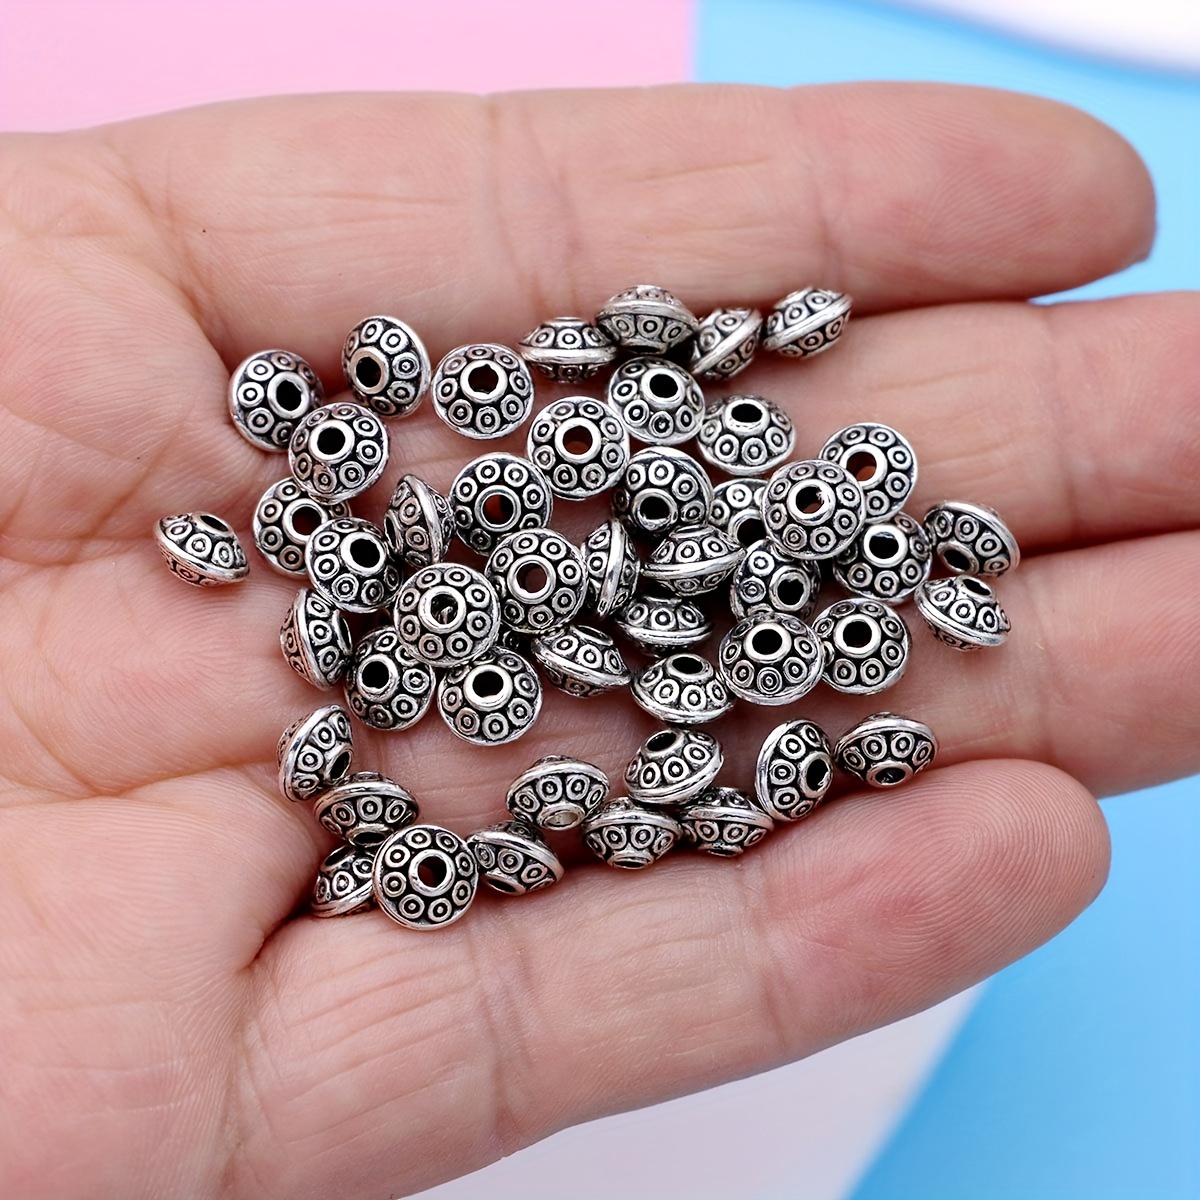 

50pcs Antique Round Silver Plated Loose Spacer Beads For Jewelry Making Bracelet Accessories Diy Handmade